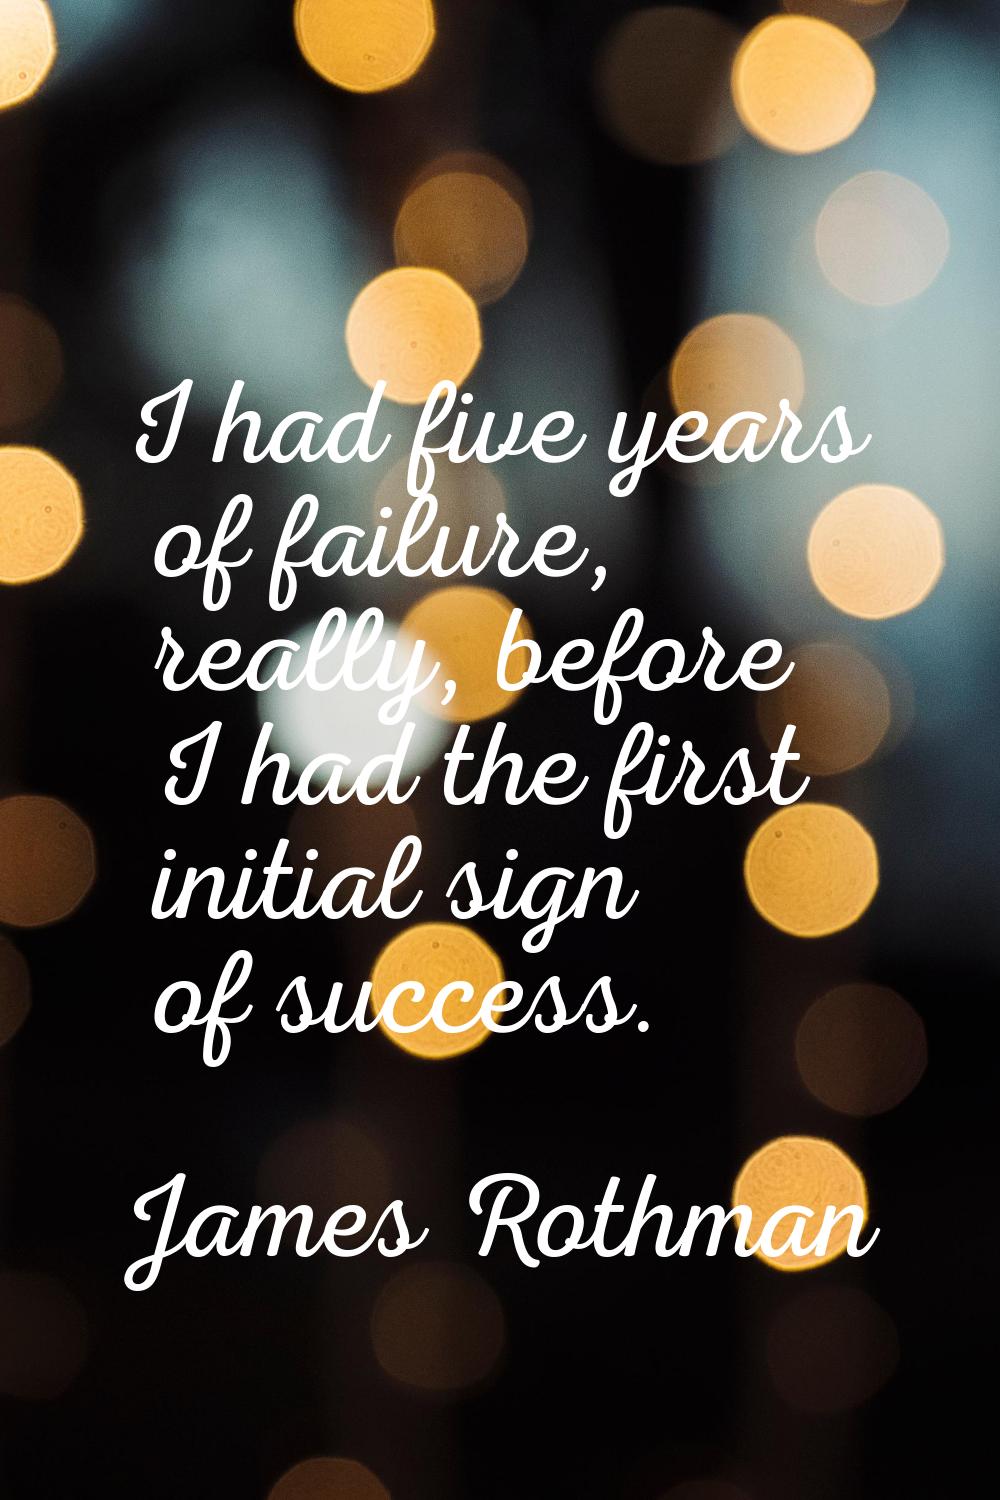 I had five years of failure, really, before I had the first initial sign of success.